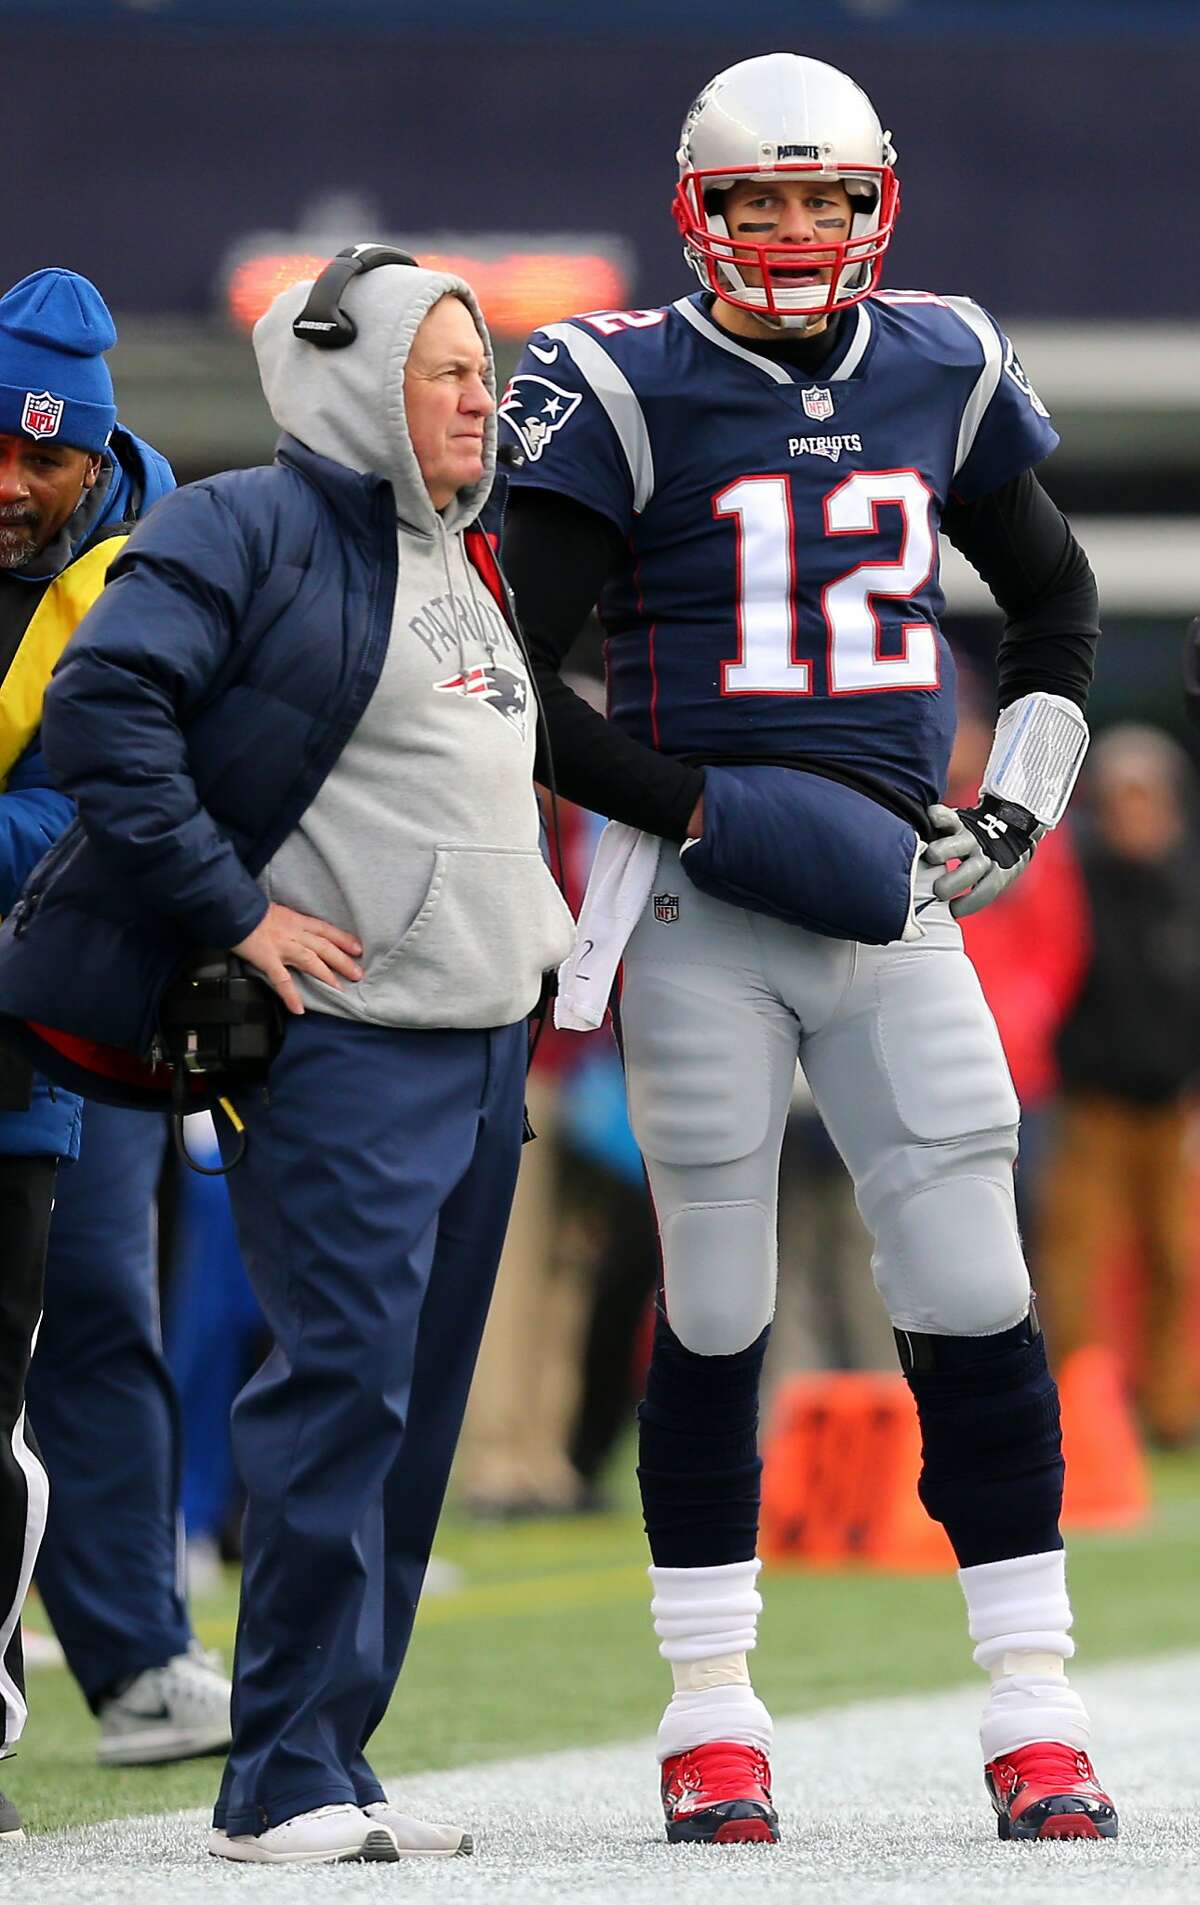 Head coach Bill Belichick of the New England Patriots stands with Tom Brady #12 during the second half against the Buffalo Bills at Gillette Stadium on December 24, 2017 in Foxboro, Massachusetts. (Photo by Maddie Meyer/Getty Images)